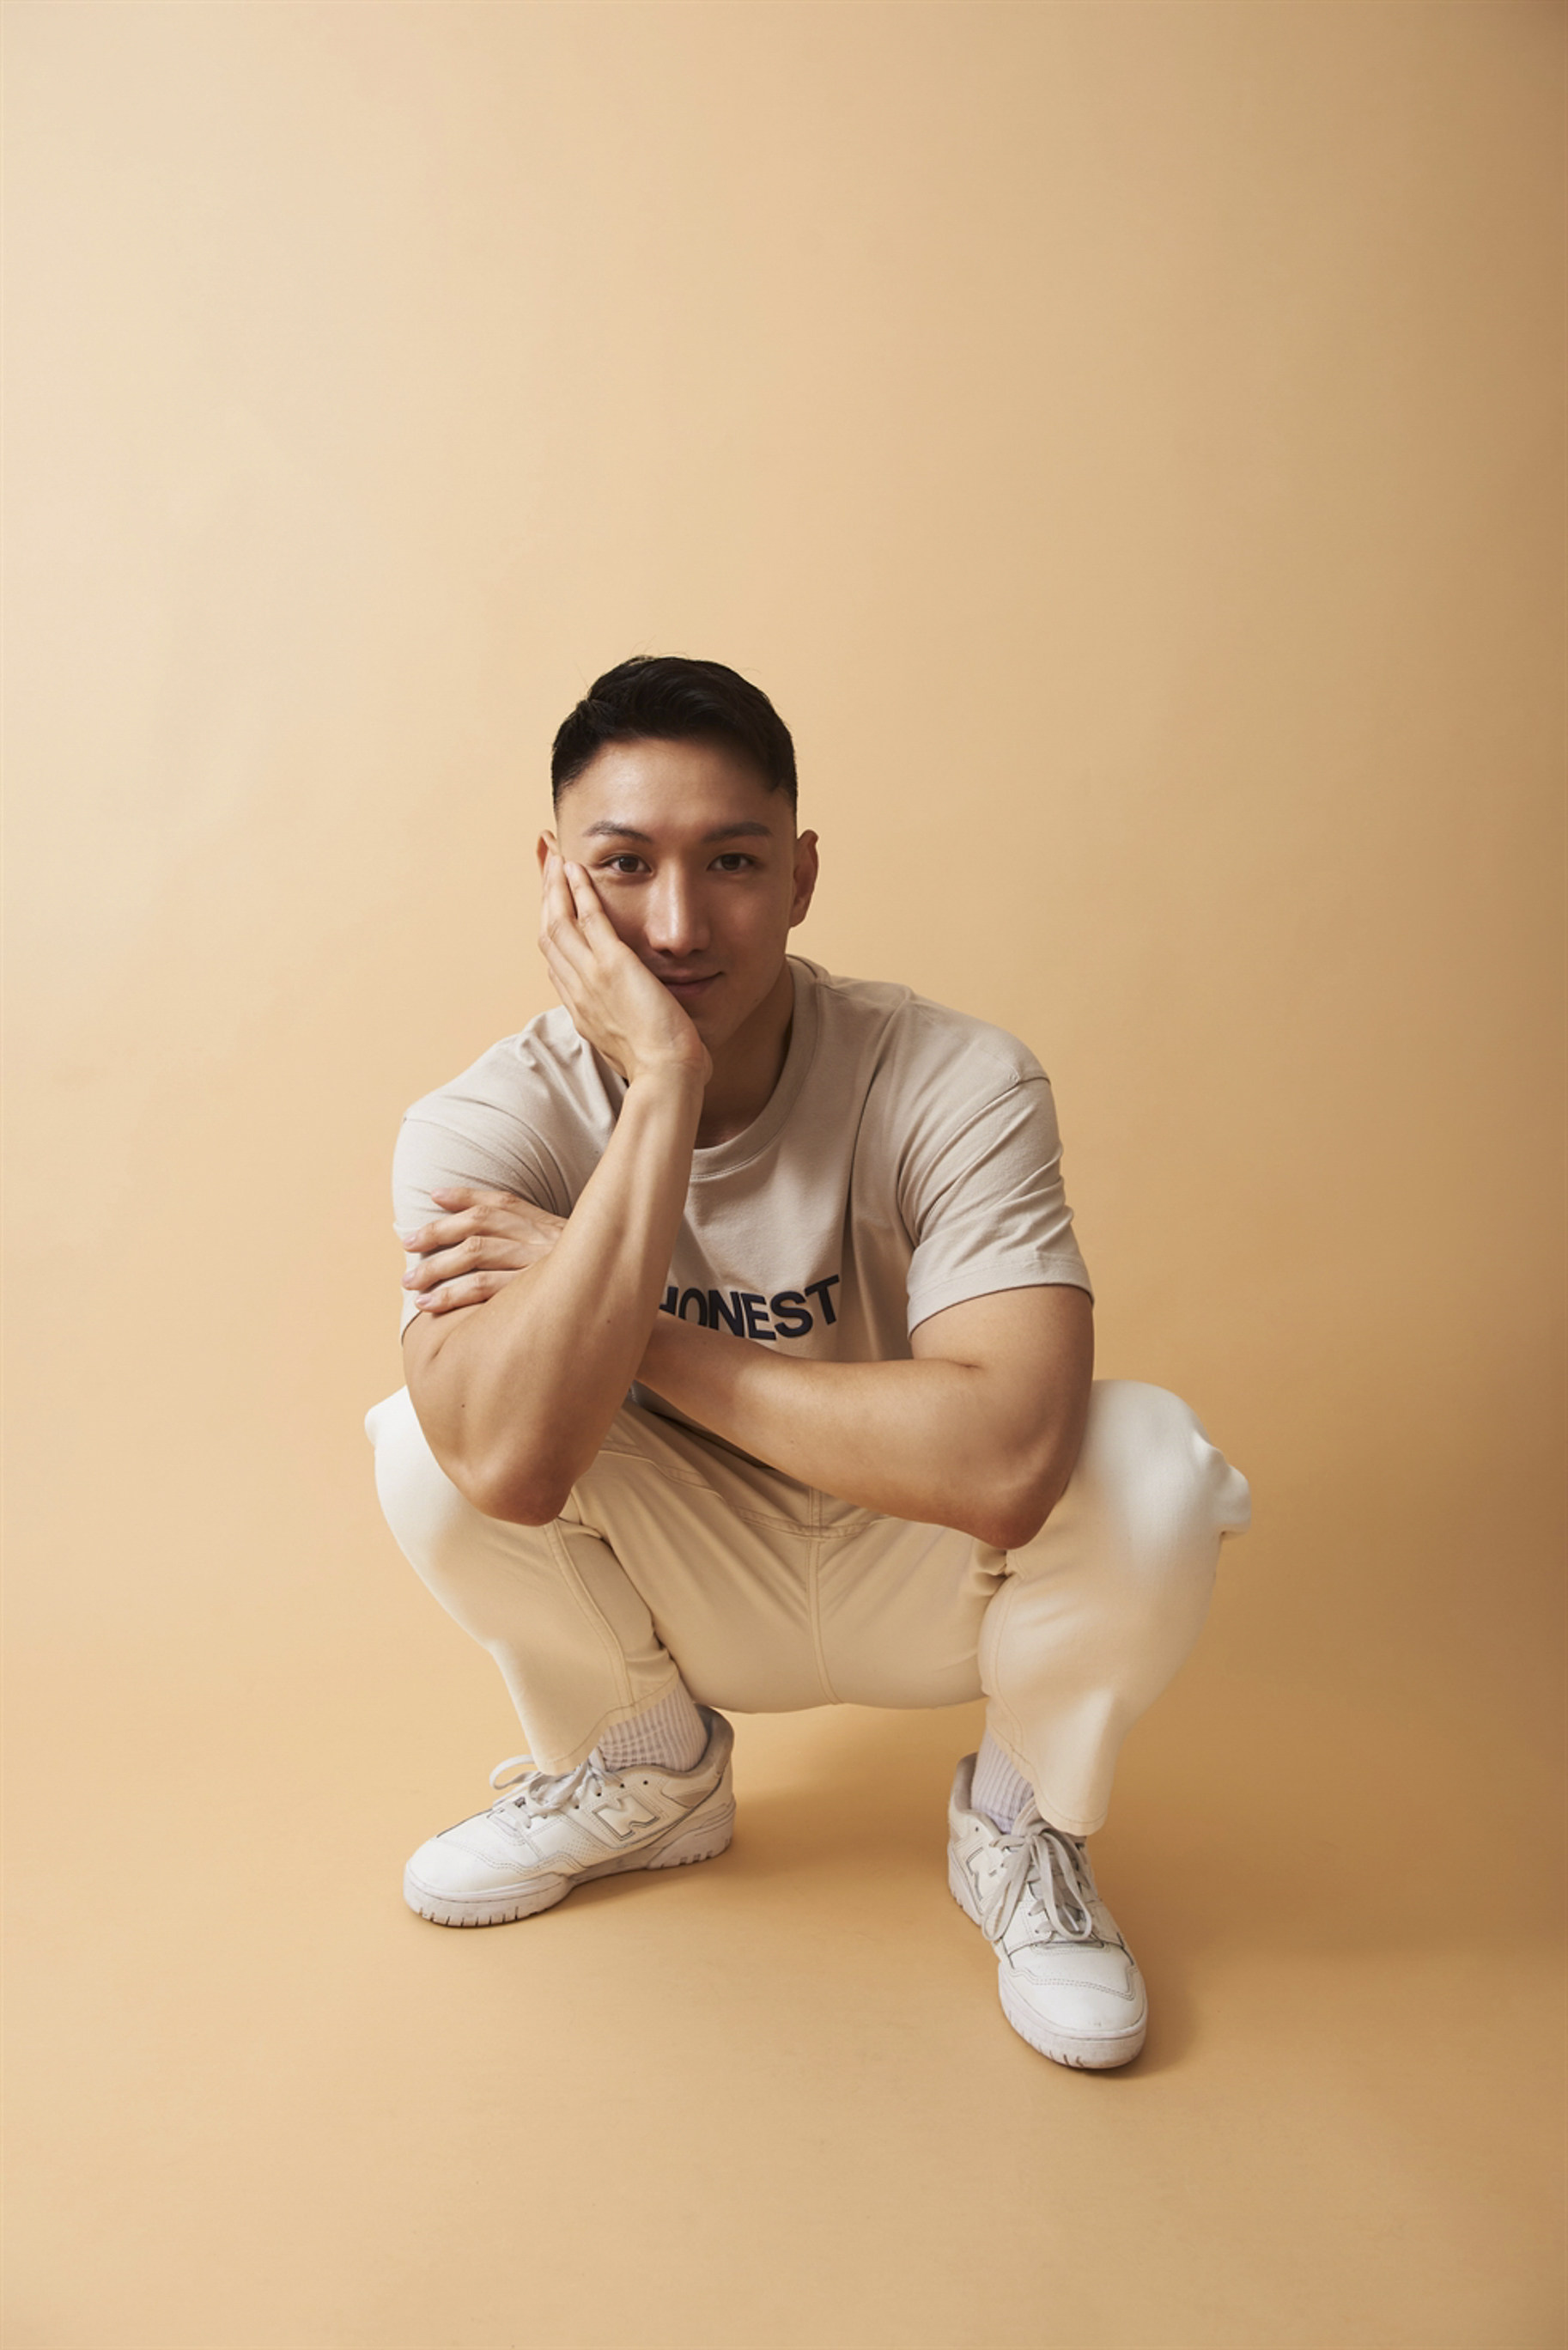 Kyler Niko nearly gave up on music after a record label passed him over. A chance encounter with the founder of music company InnerV8 Musiq led to a new career – now he is a hit K-pop songwriter. Photo: courtesy of InnerV8 Musiq